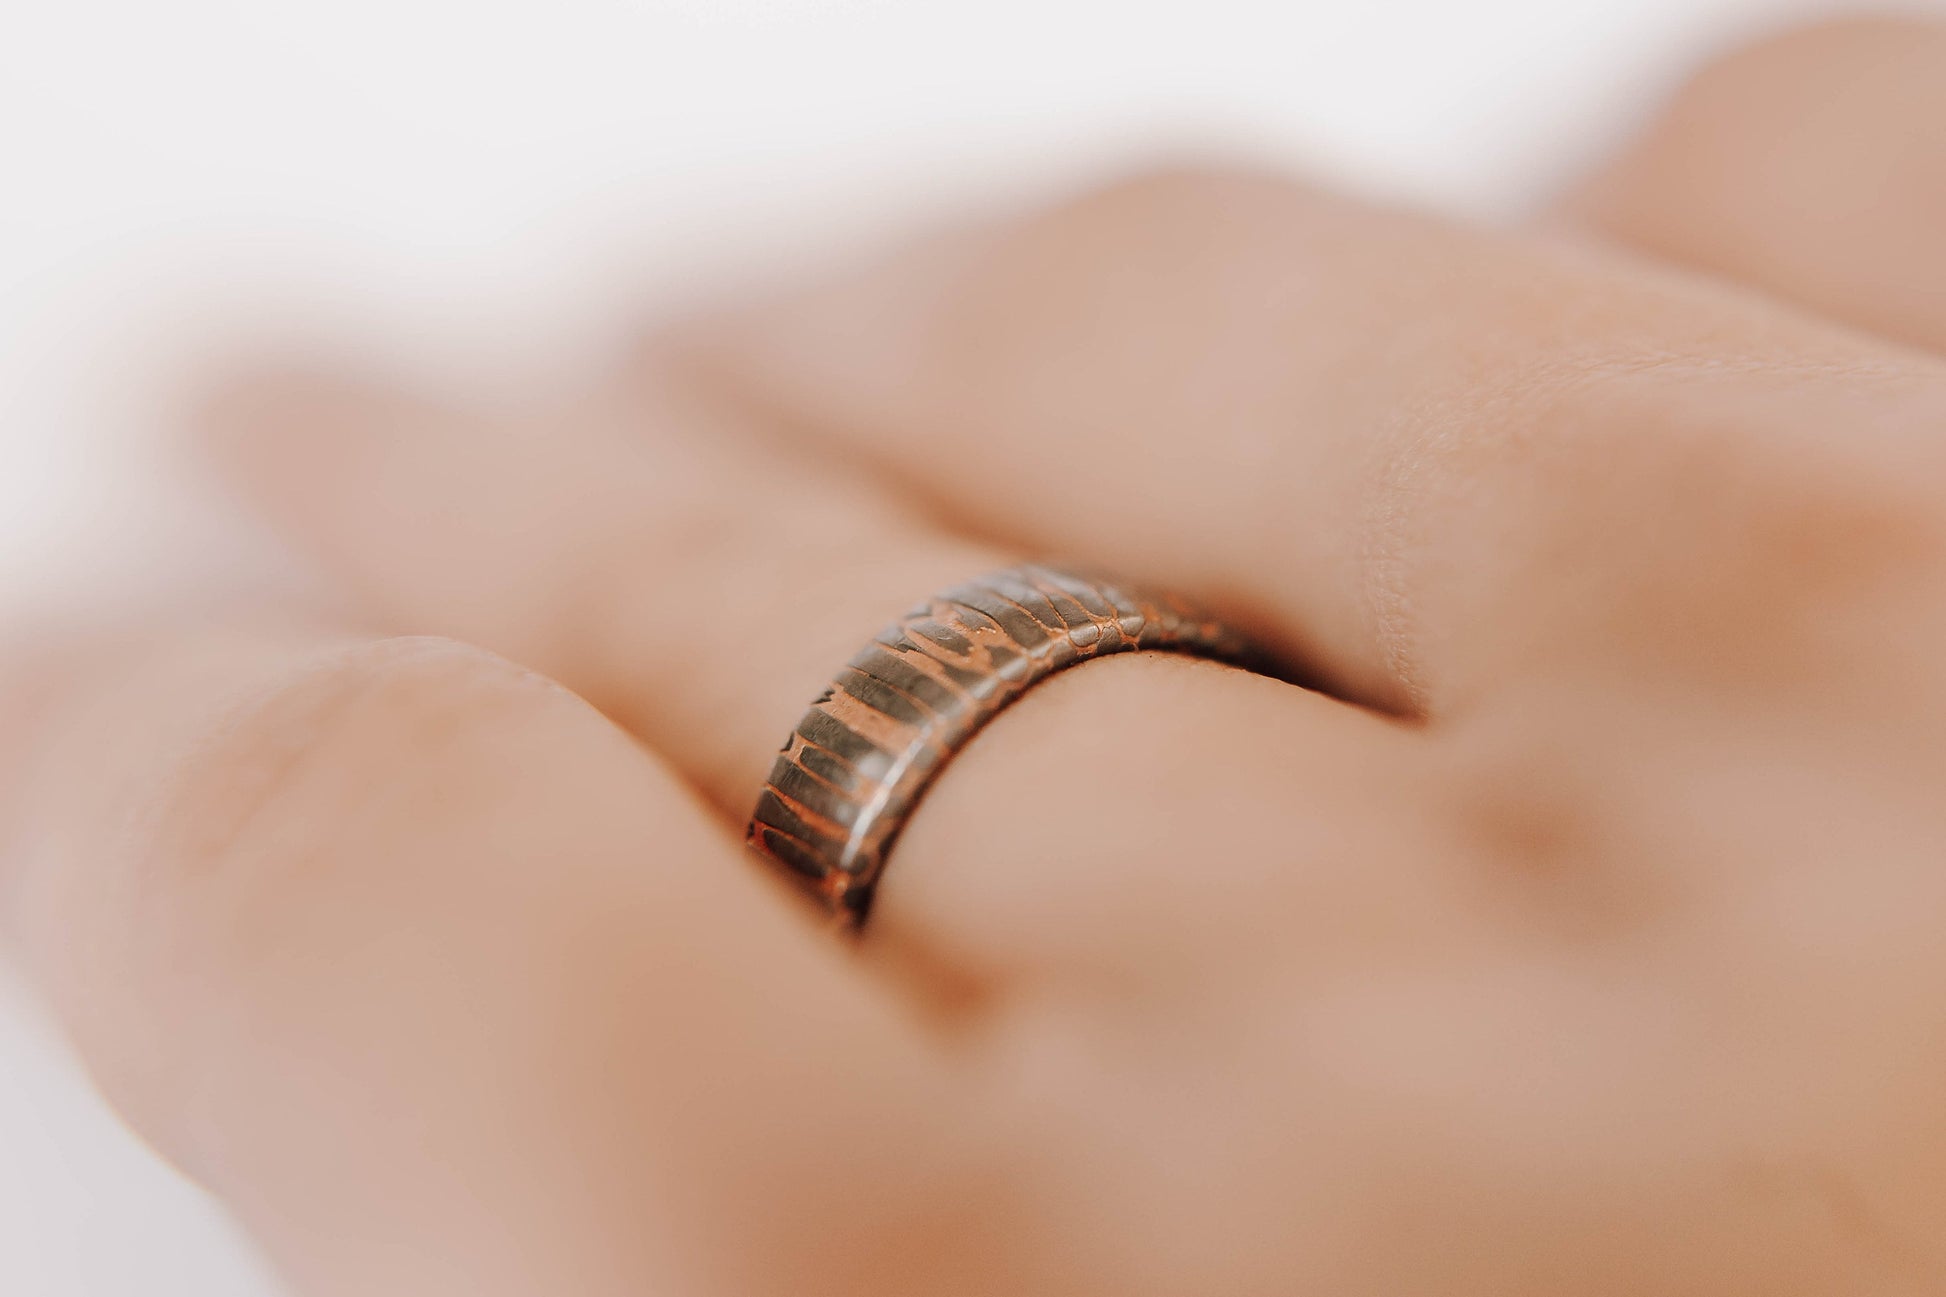 Superconductor wedding band. This photo shows an etched titanium-niobium and copper striped ring. (Shown on finger)